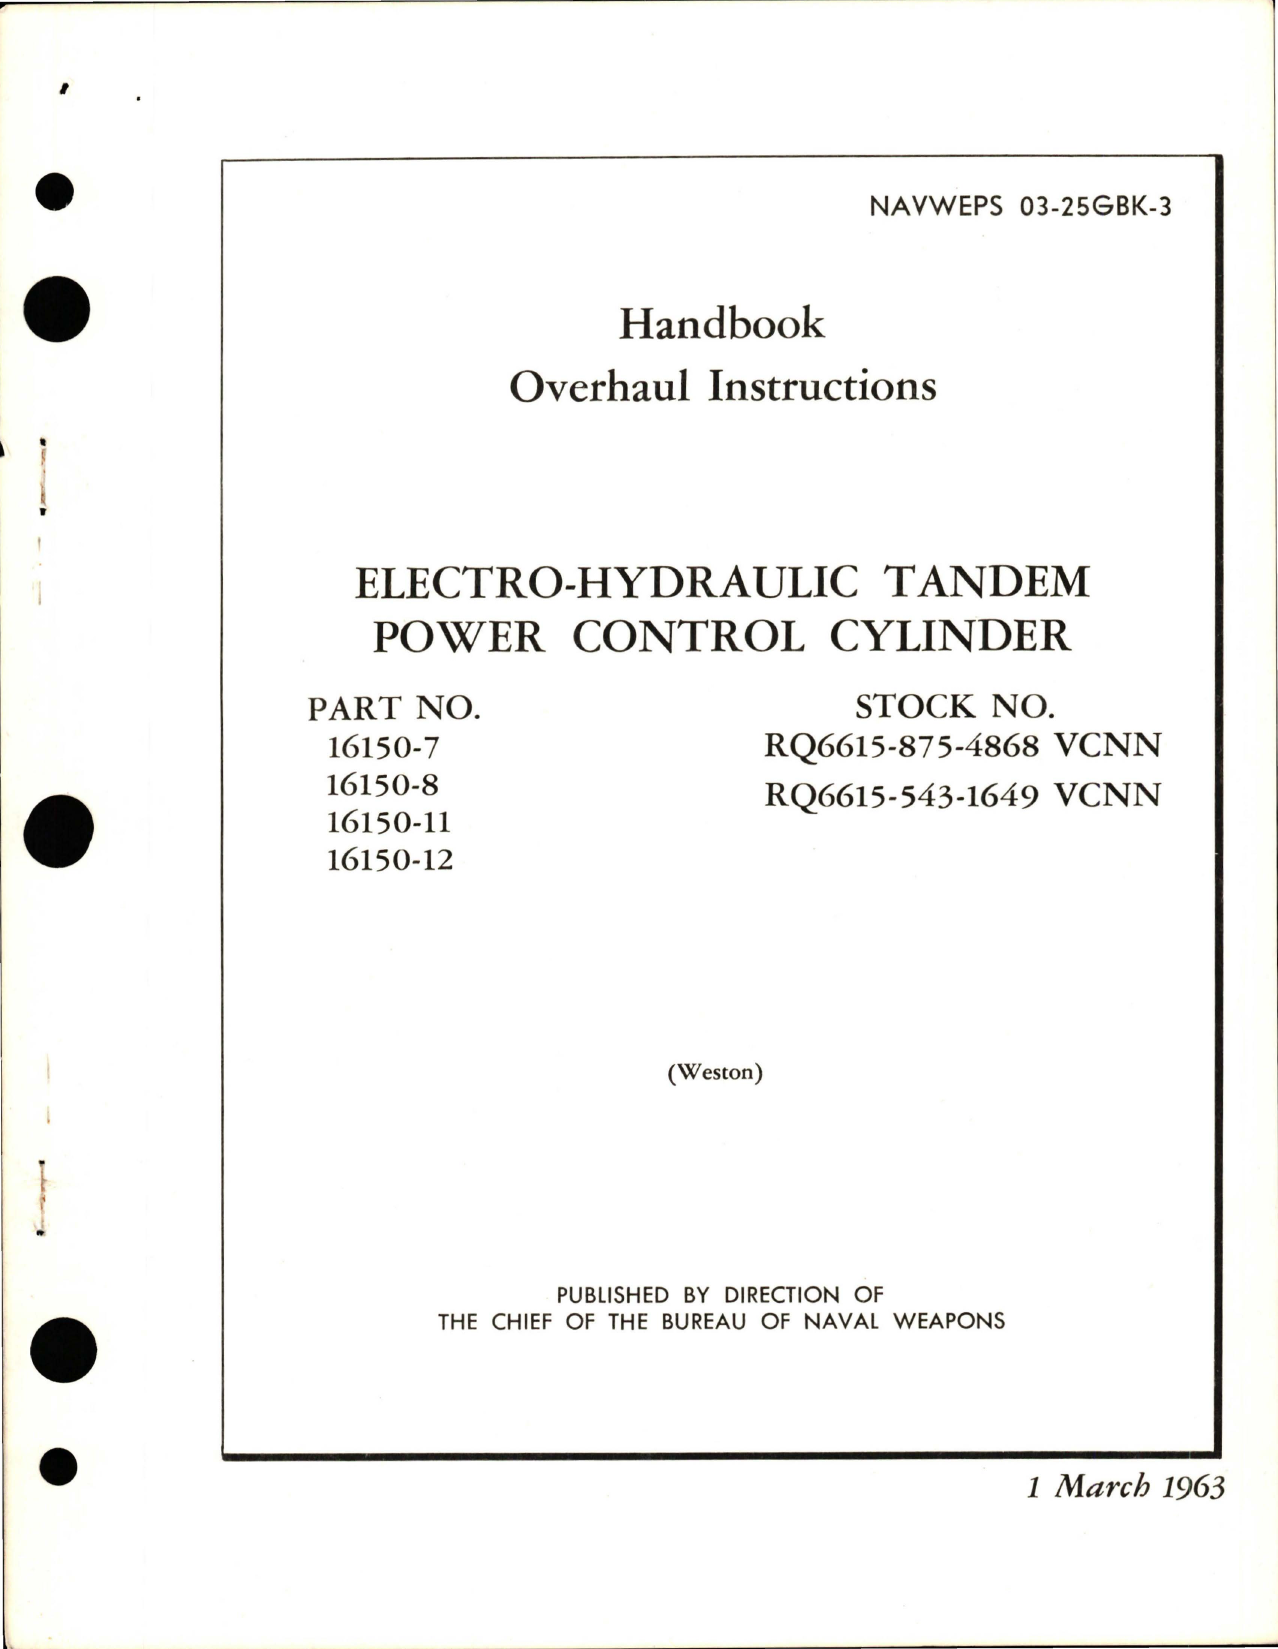 Sample page 1 from AirCorps Library document: Overhaul Instructions for Electro-Hydraulic Tandem Power Control Cylinder - Parts 16150-7, 16150-8, 16150-11, and 16150-12 